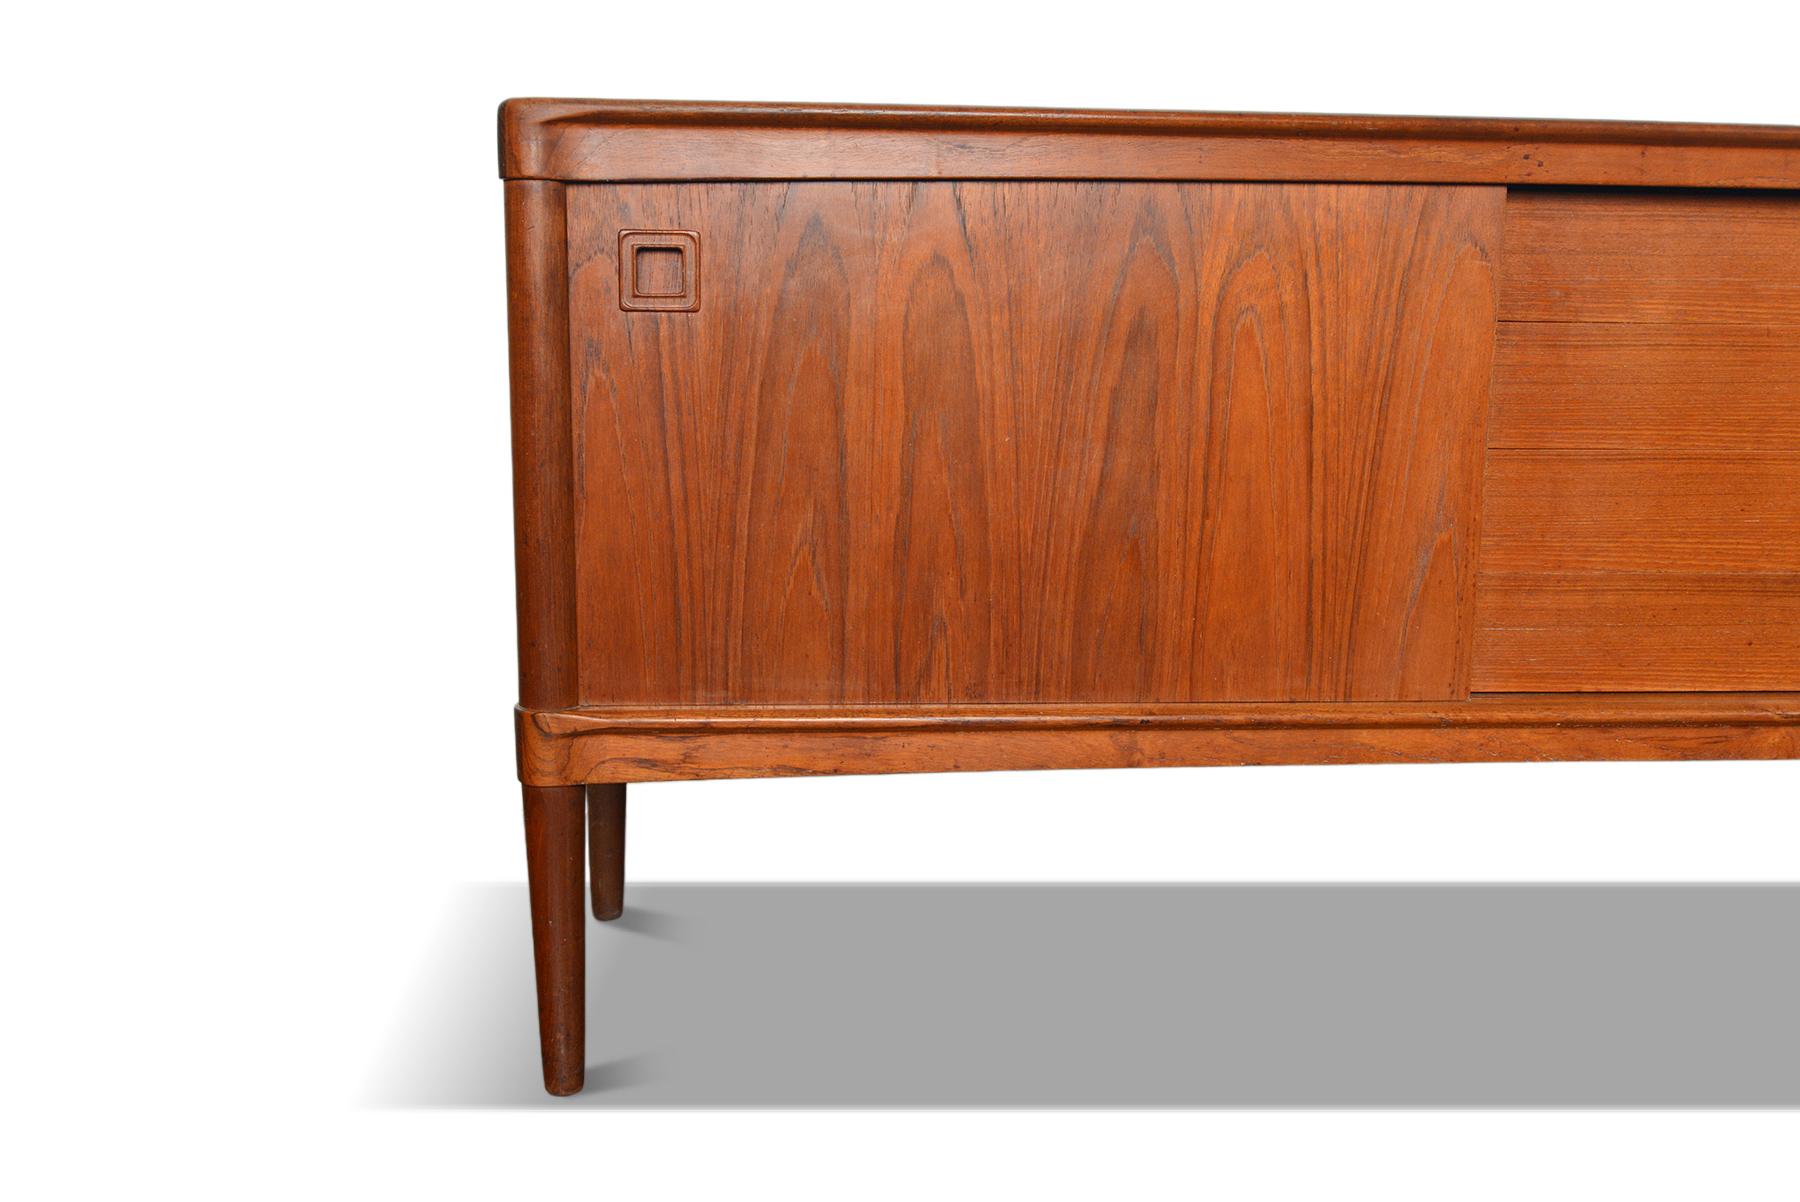 20th Century Square Pull Teak Credenza by h.w. Klein #1 For Sale